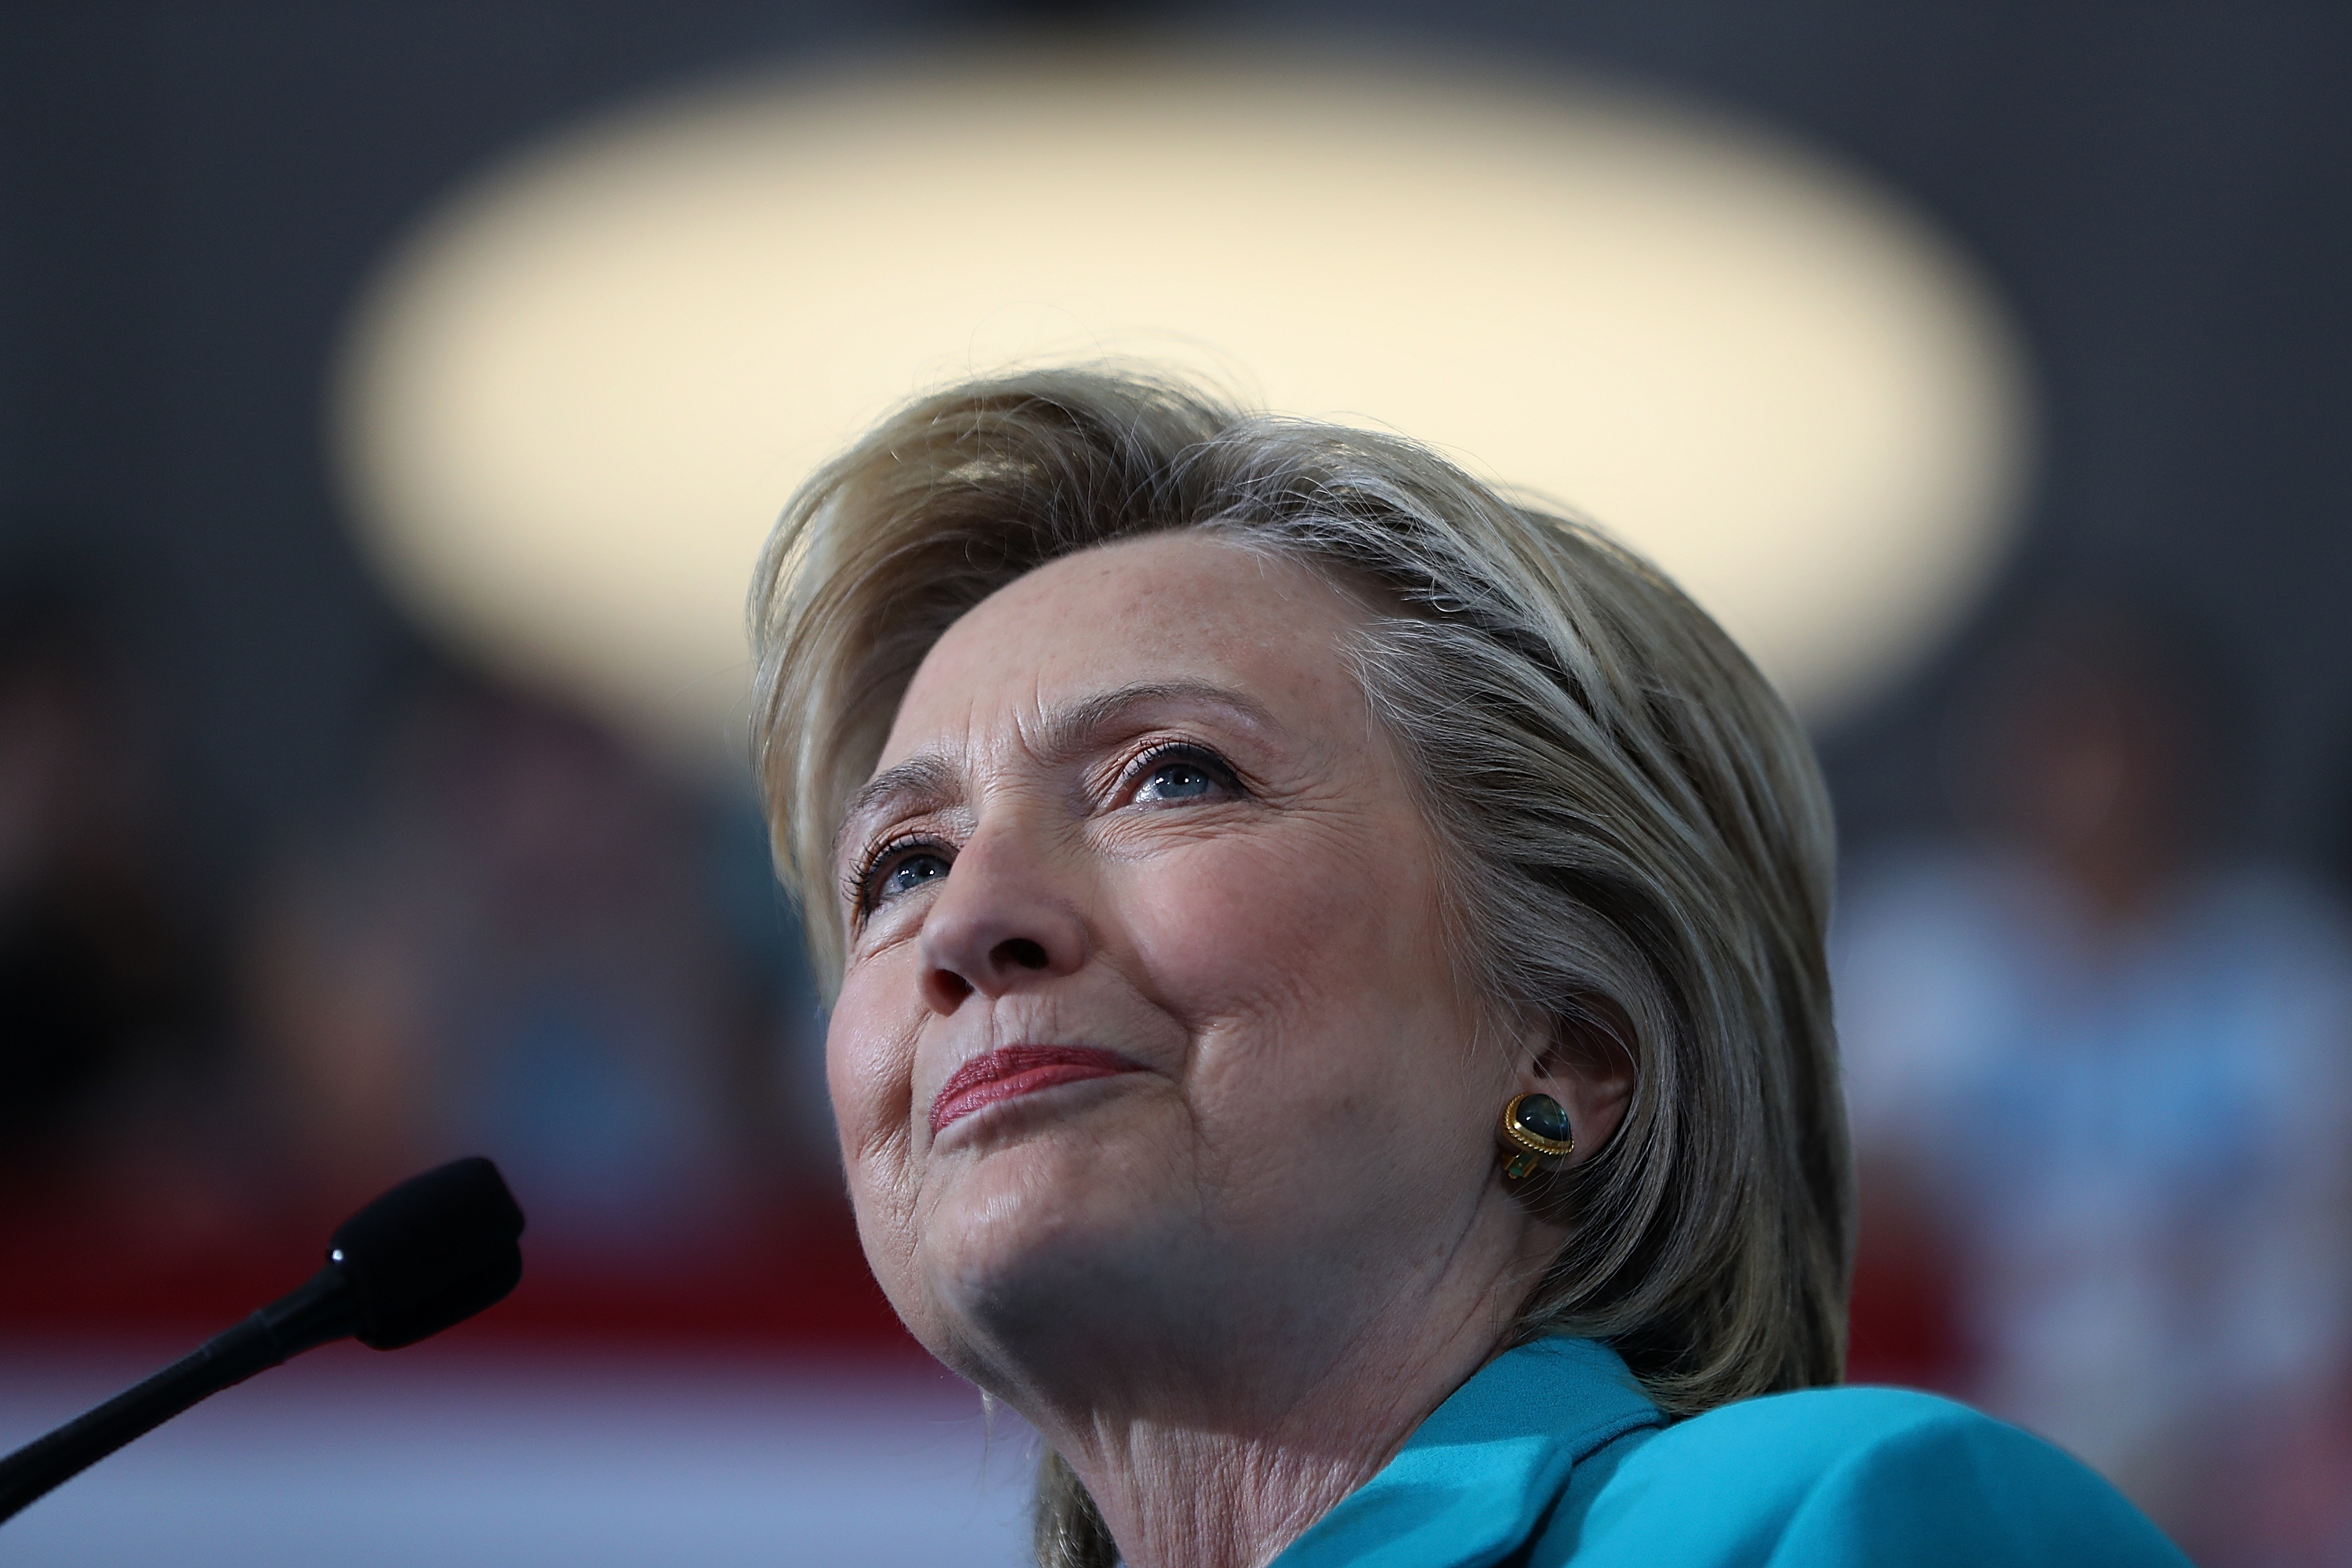 Democratic presidential nominee former Secretary of State Hillary Clinton speaks during a campaign even at Truckee Meadows Community College in Reno, Nev., on Aug. 25, 2016. (Justin Sullivan—Getty Images)